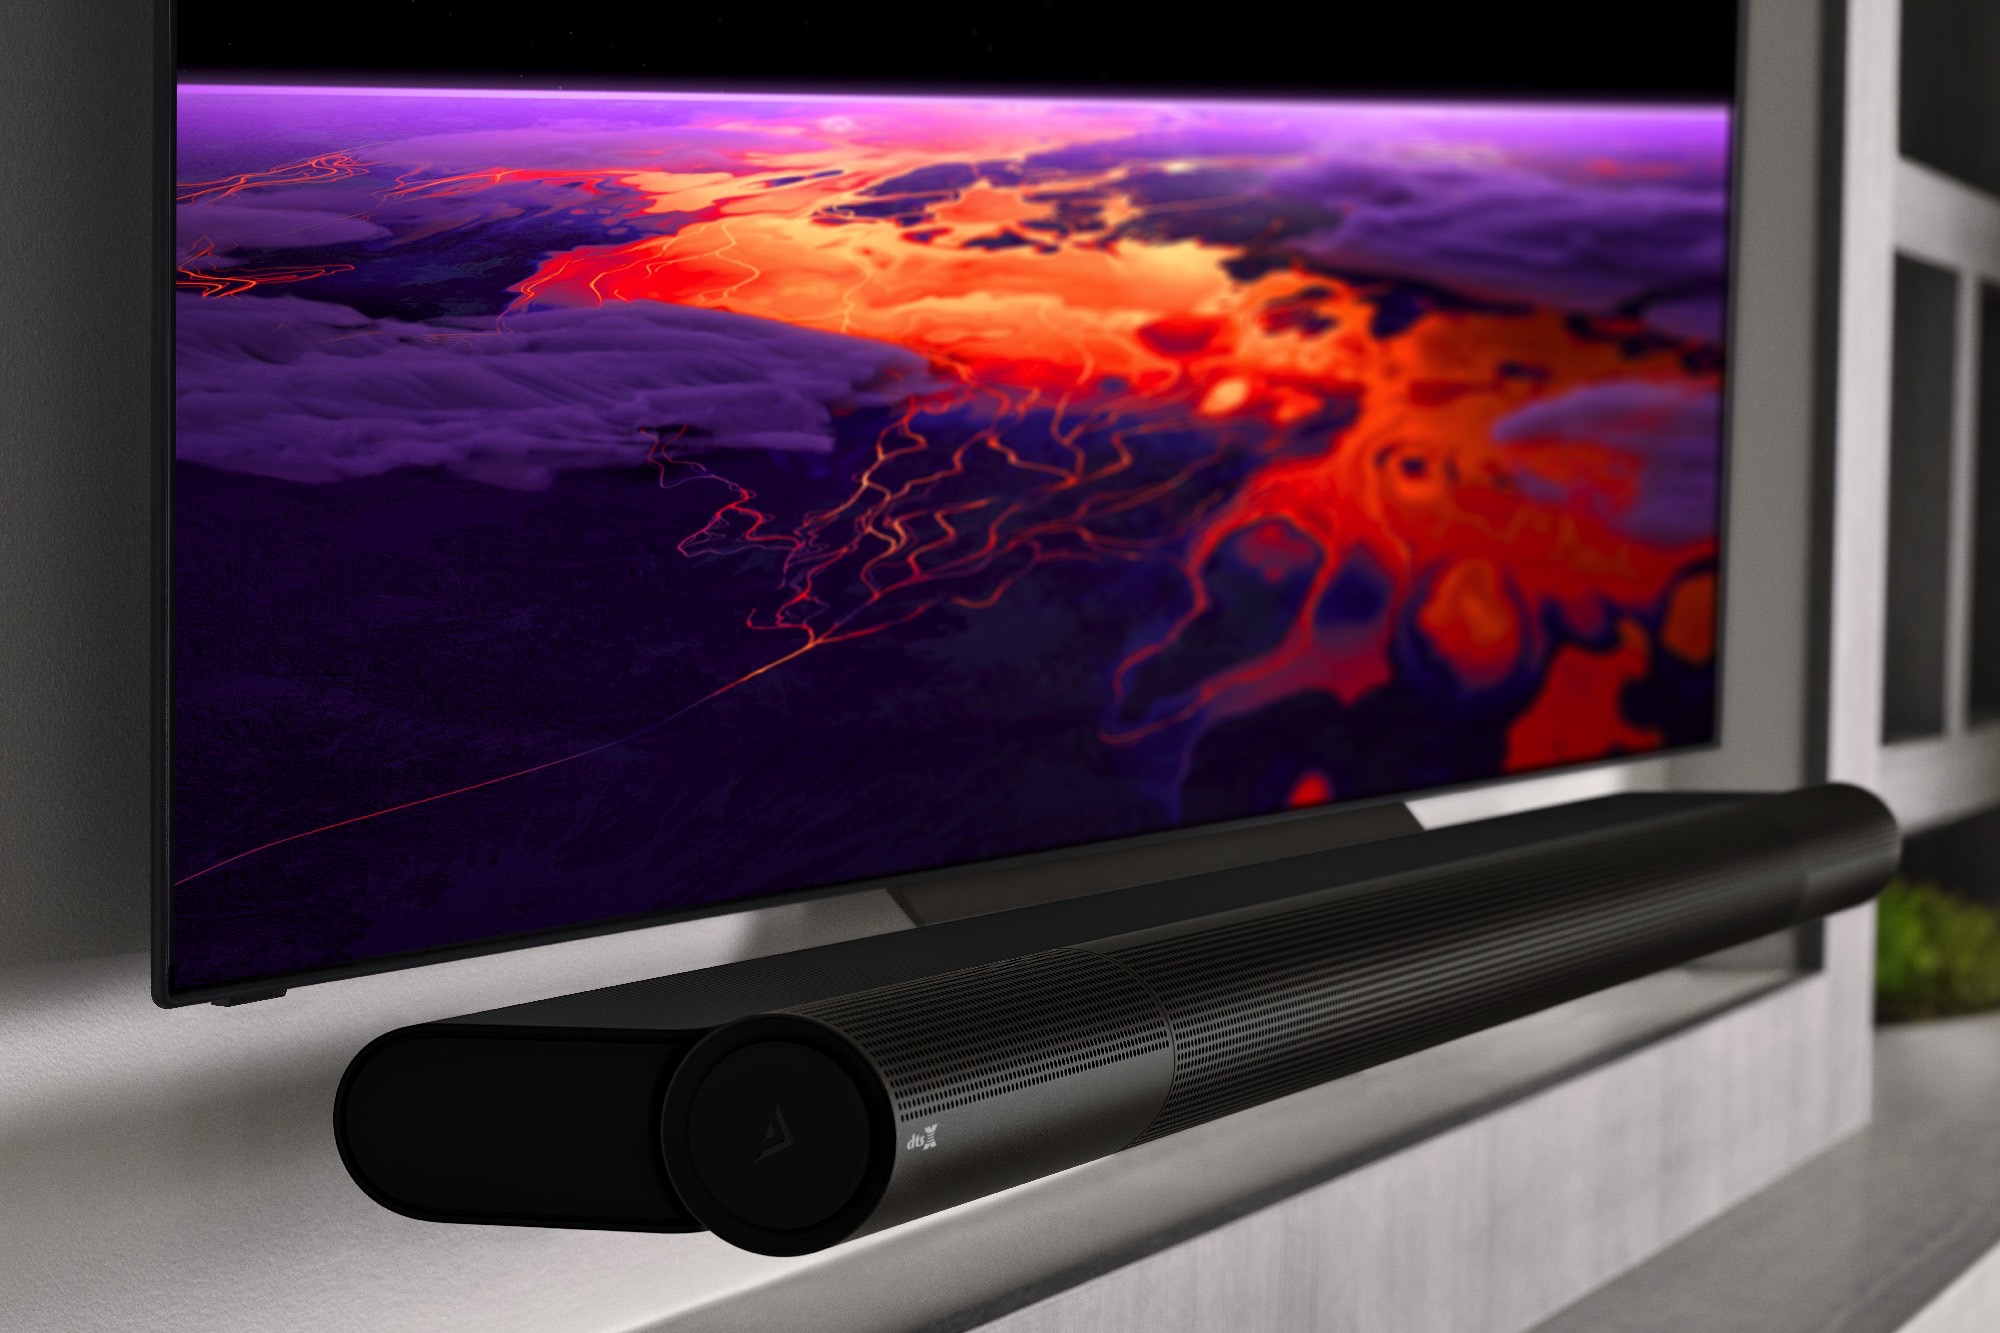 Factors to consider when choosing a sound bar for a 55-inch TV: